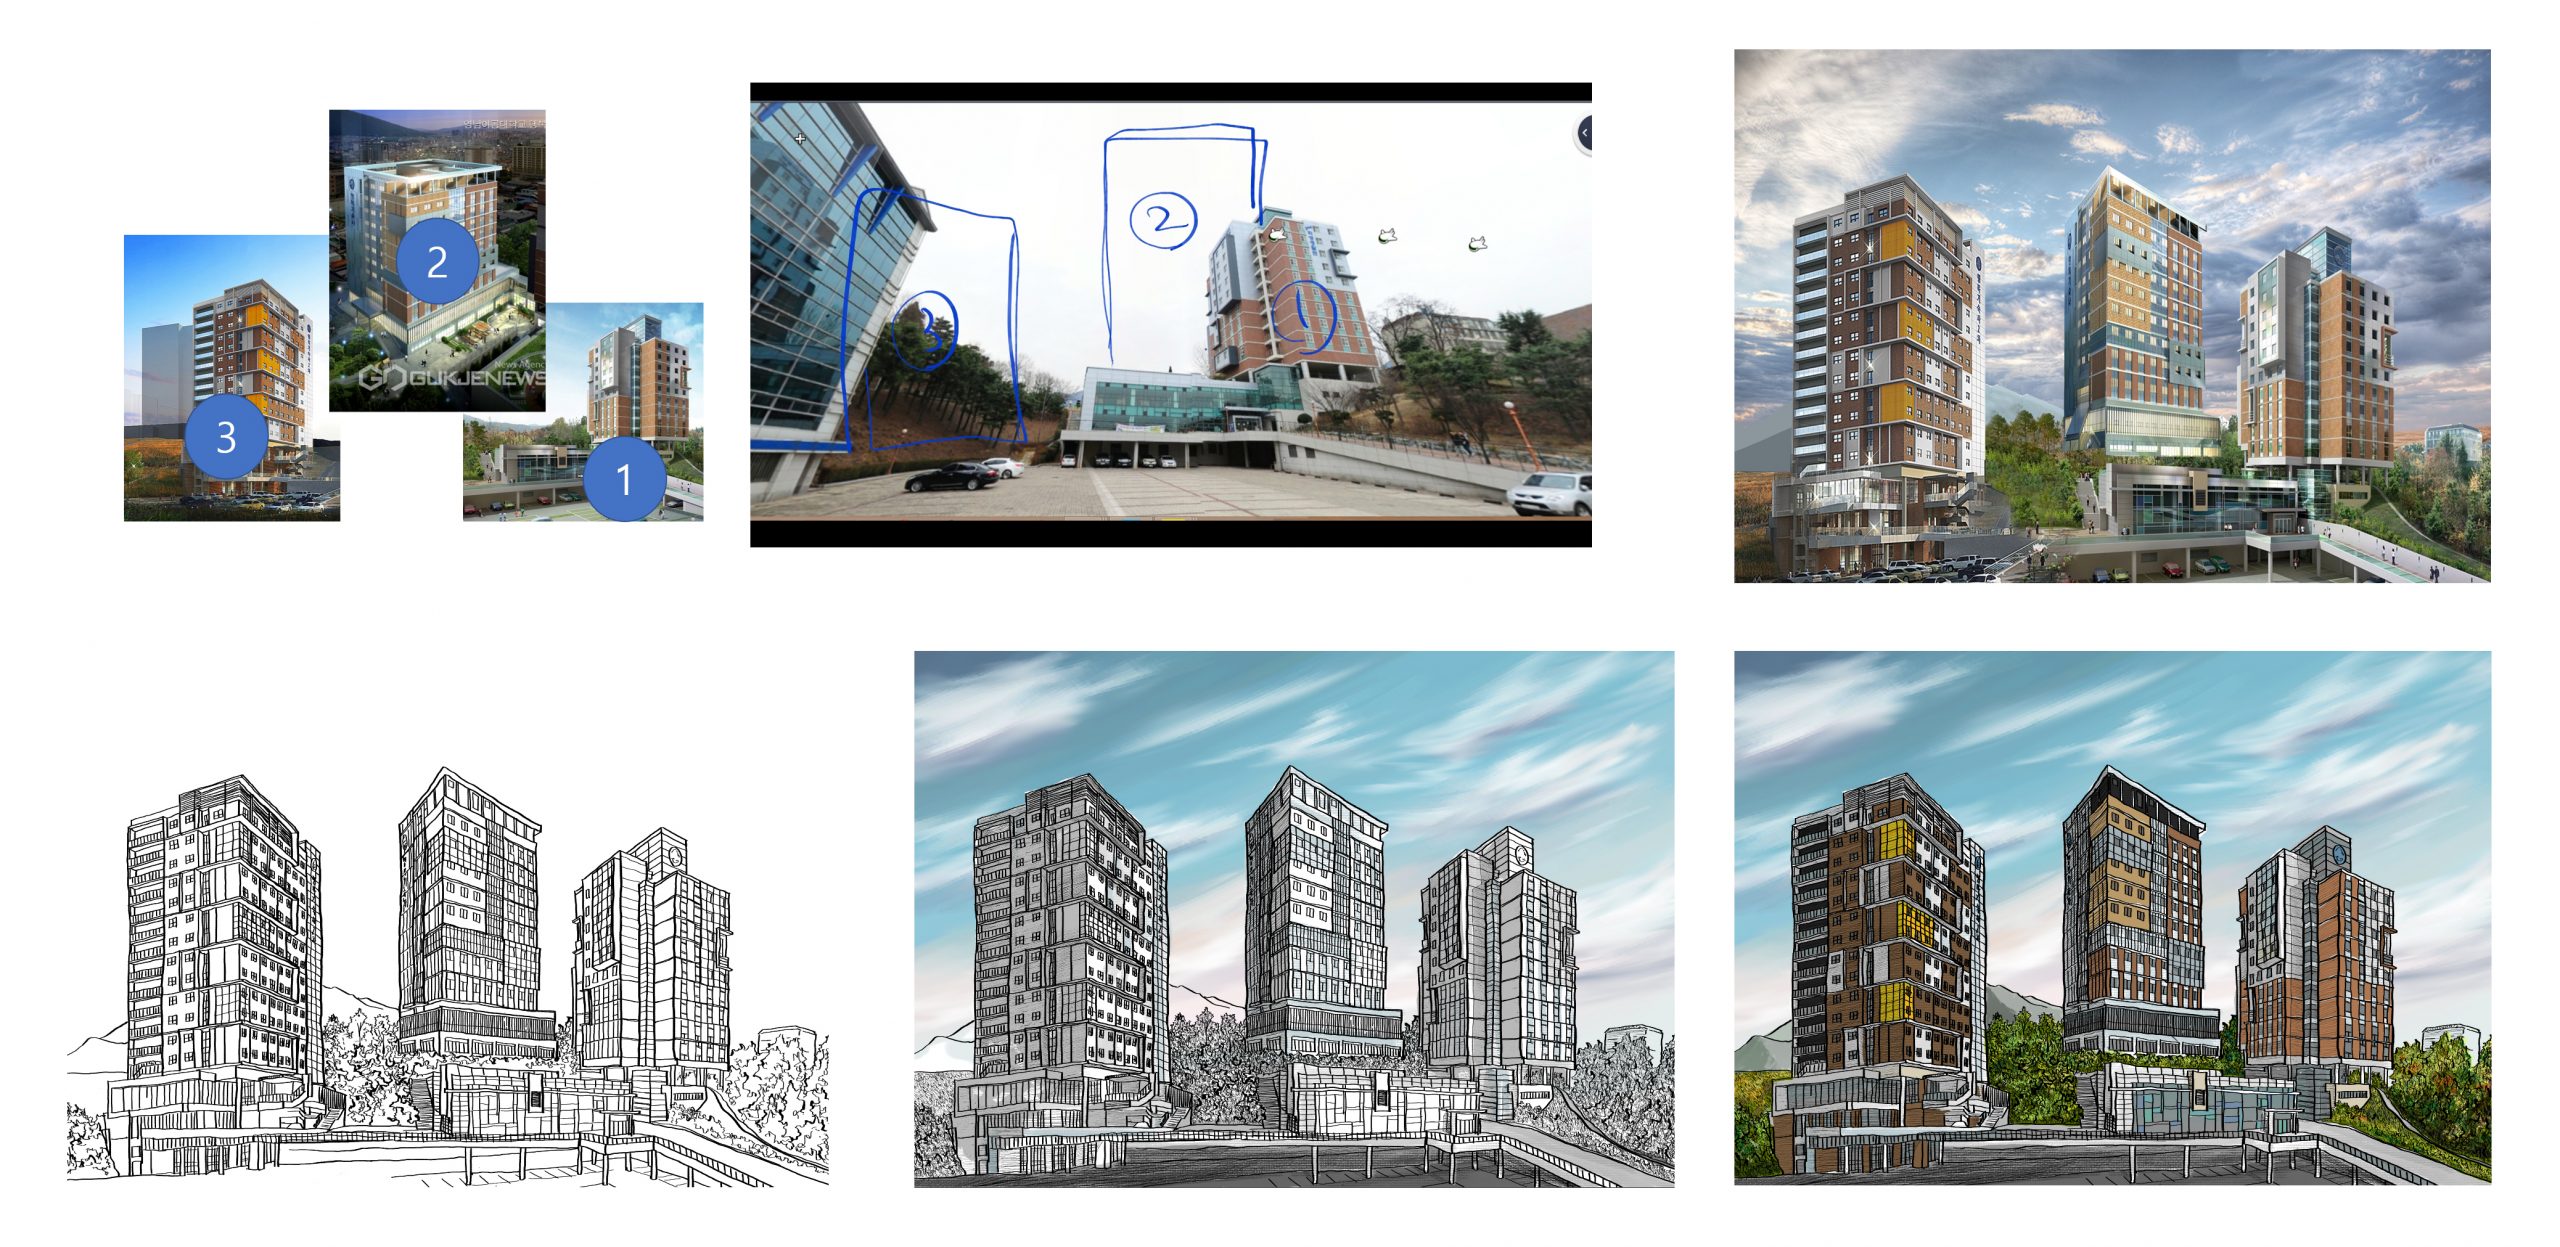 It shows the six sequential images to present the process of the color perspective view above.